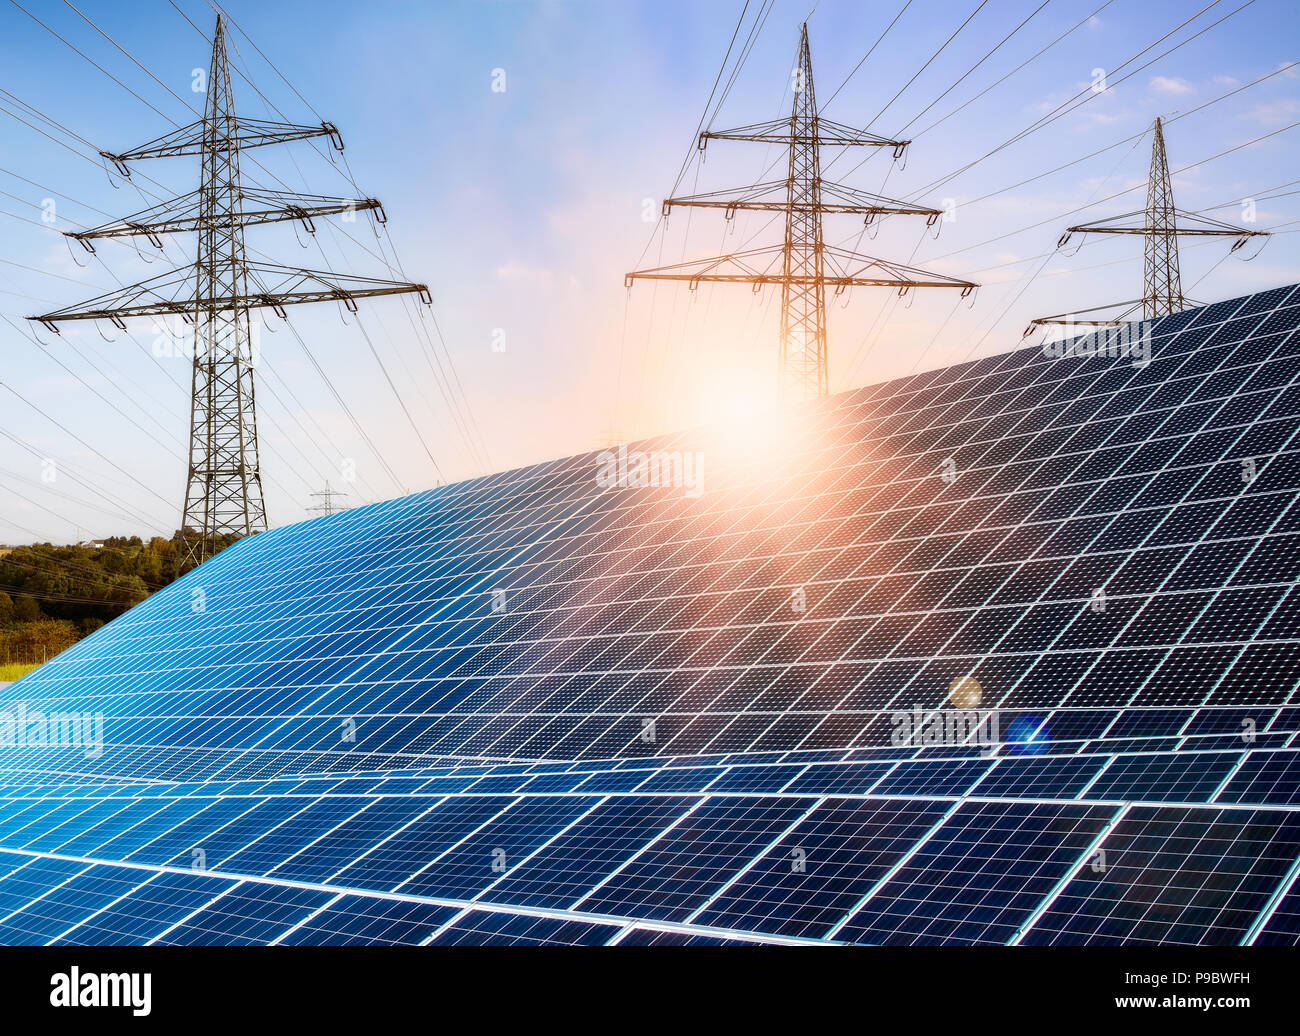 Photovoltaic system with power poles and bright sunshine Stock Photo